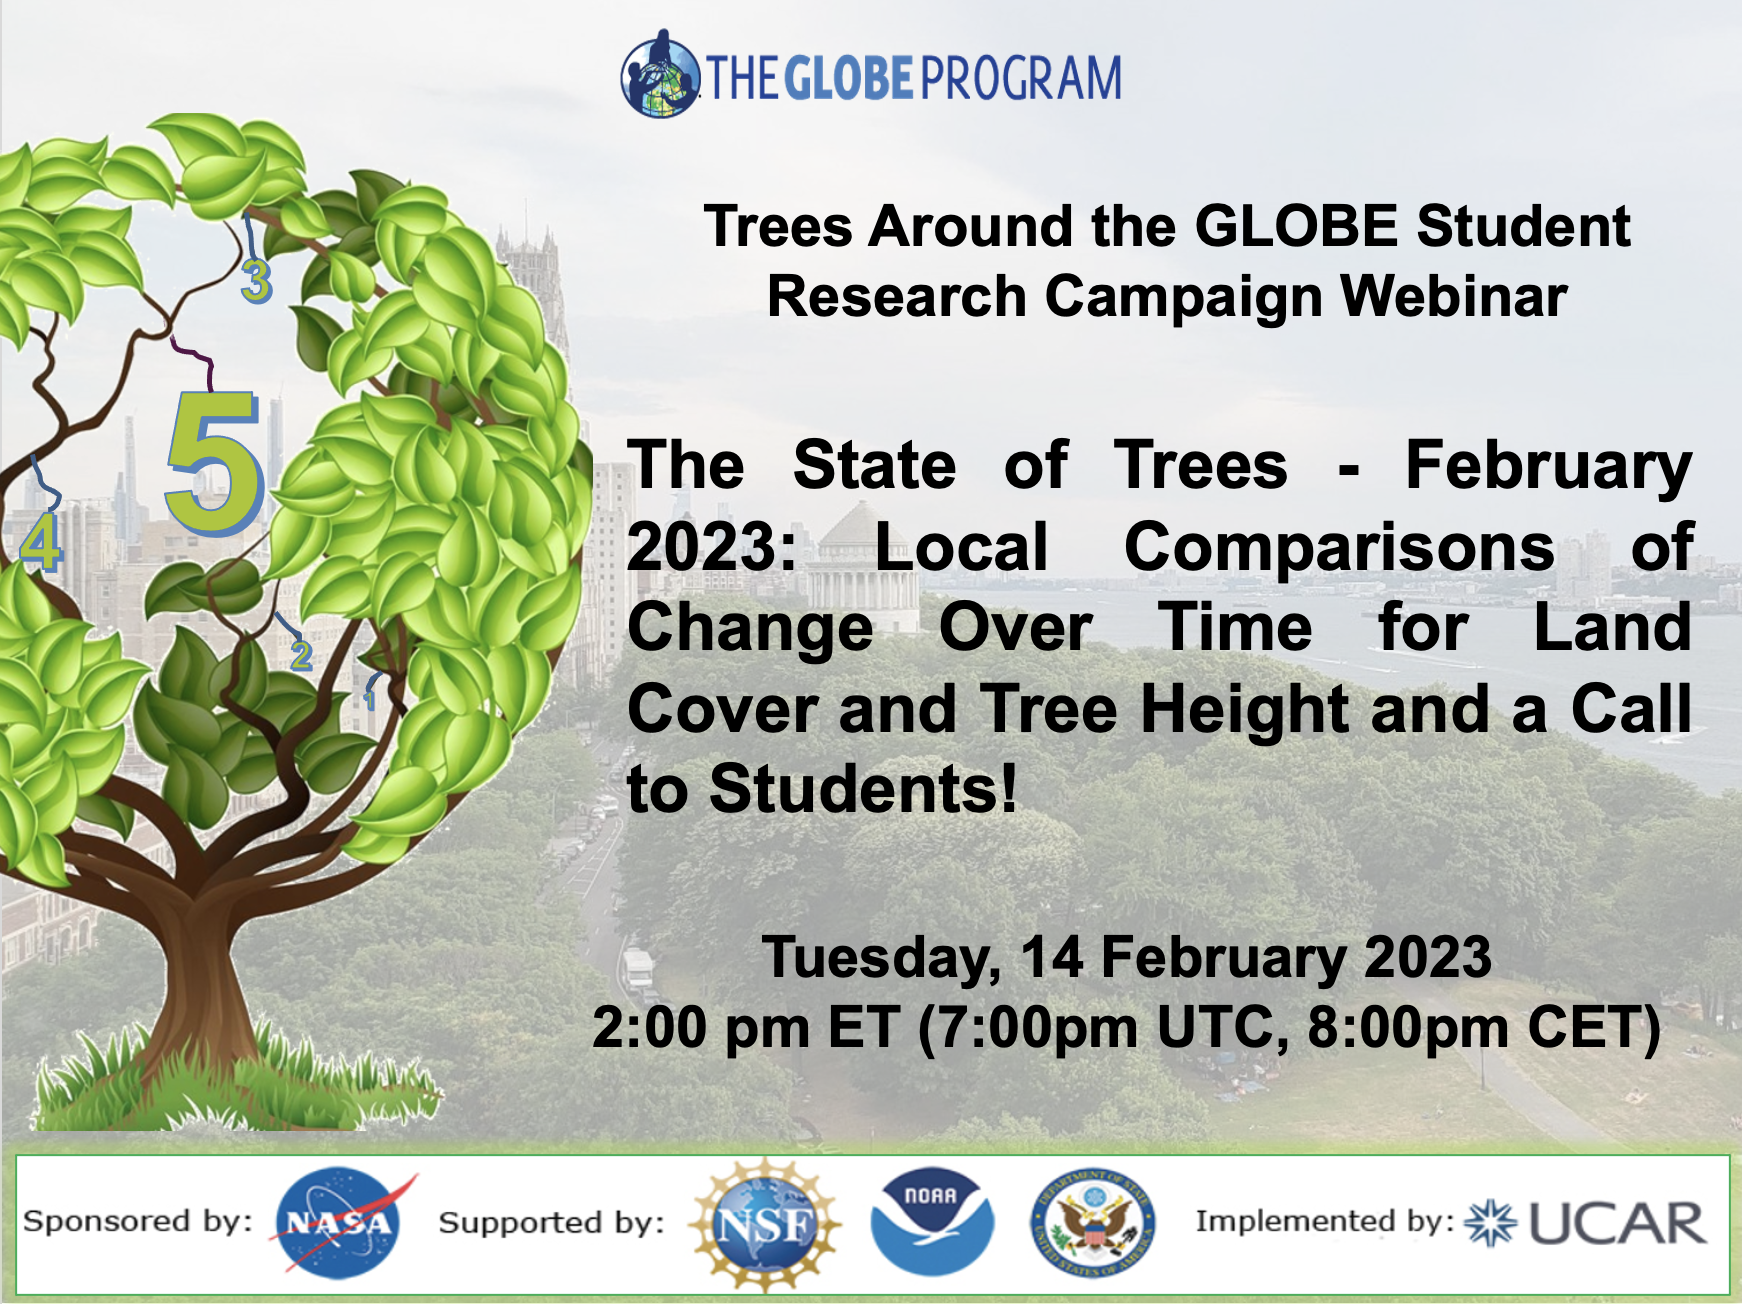 Trees Around the GLOBE 14 February webinar shareable, showing the time and date of the event